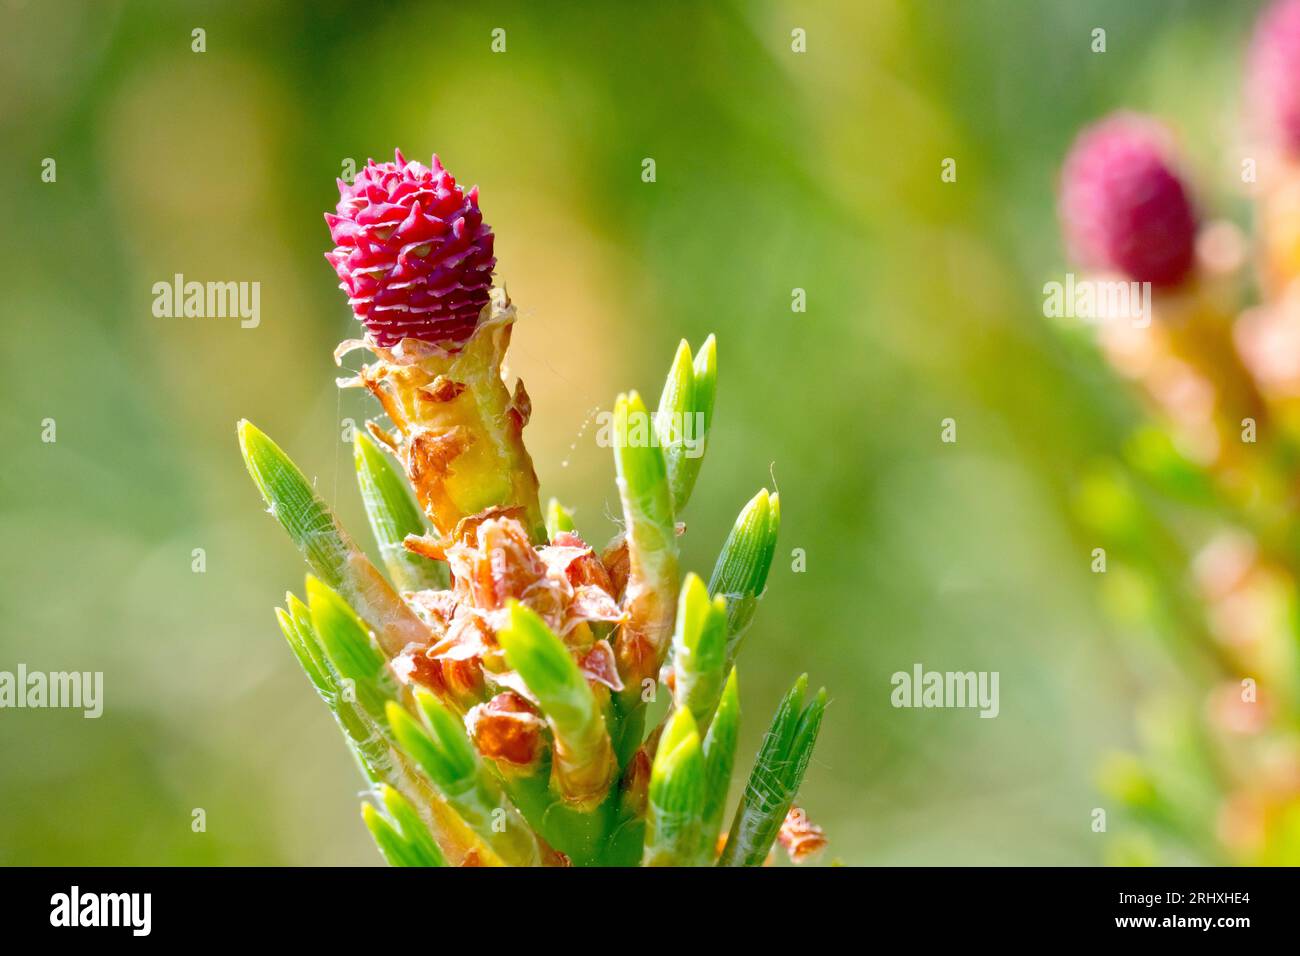 Scot's Pine (pinus sylvestris), close up of the small pink female flower of the common evergreen tree. Stock Photo